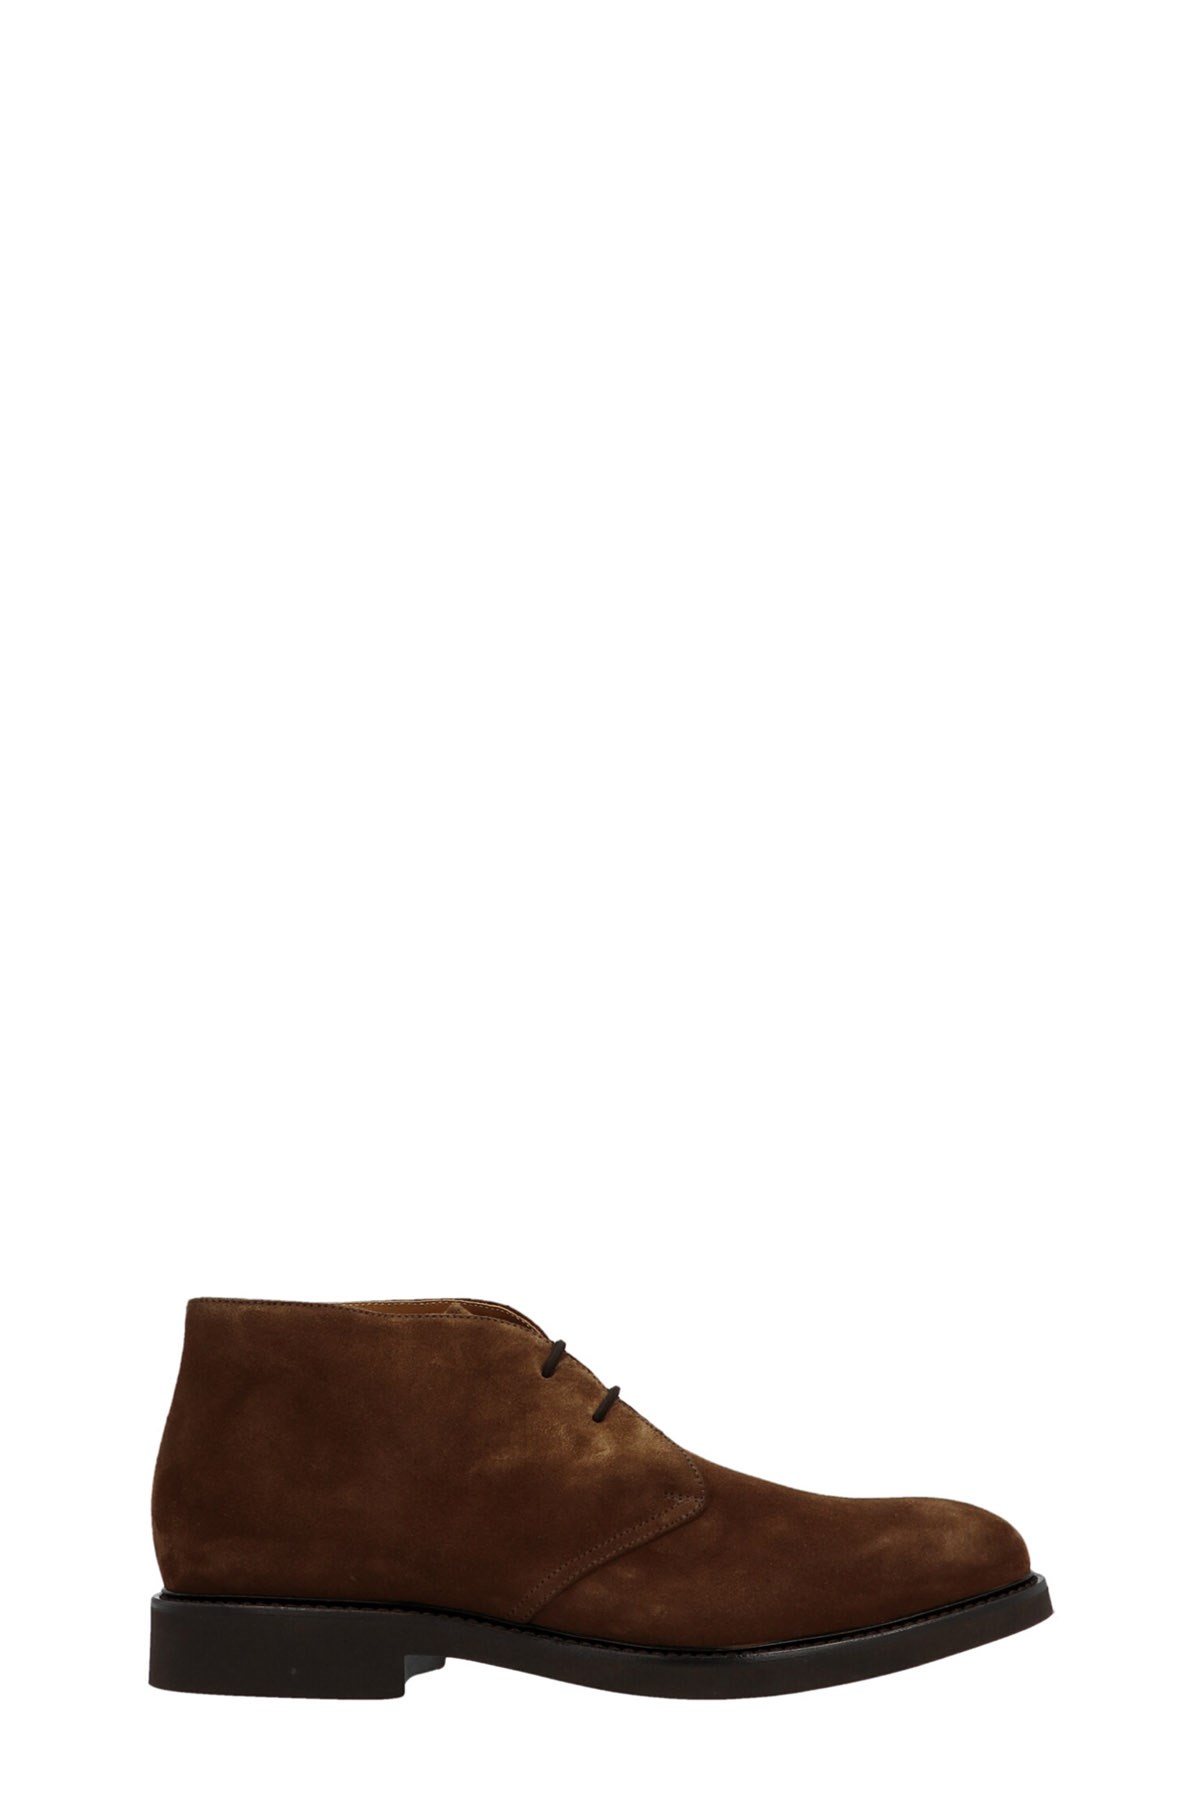 DOUCAL'S Lace-Up Ankle Boot